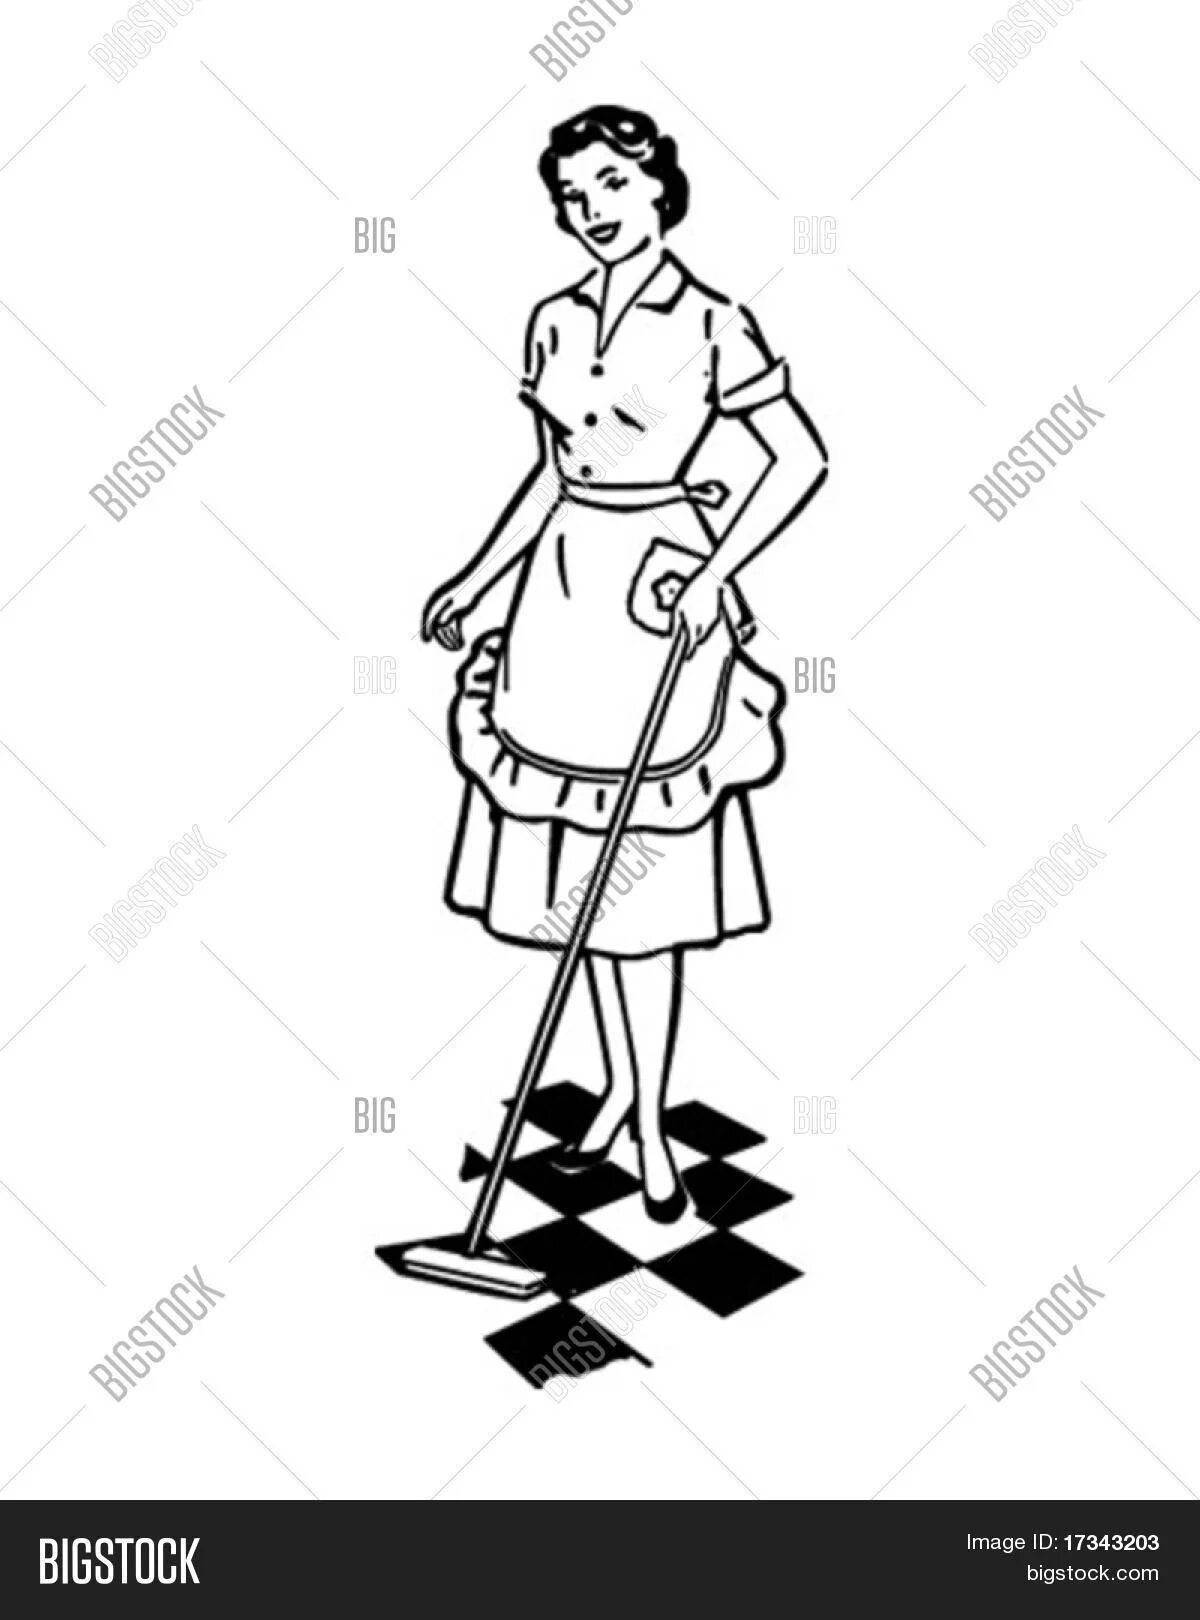 Adorable housewife coloring page